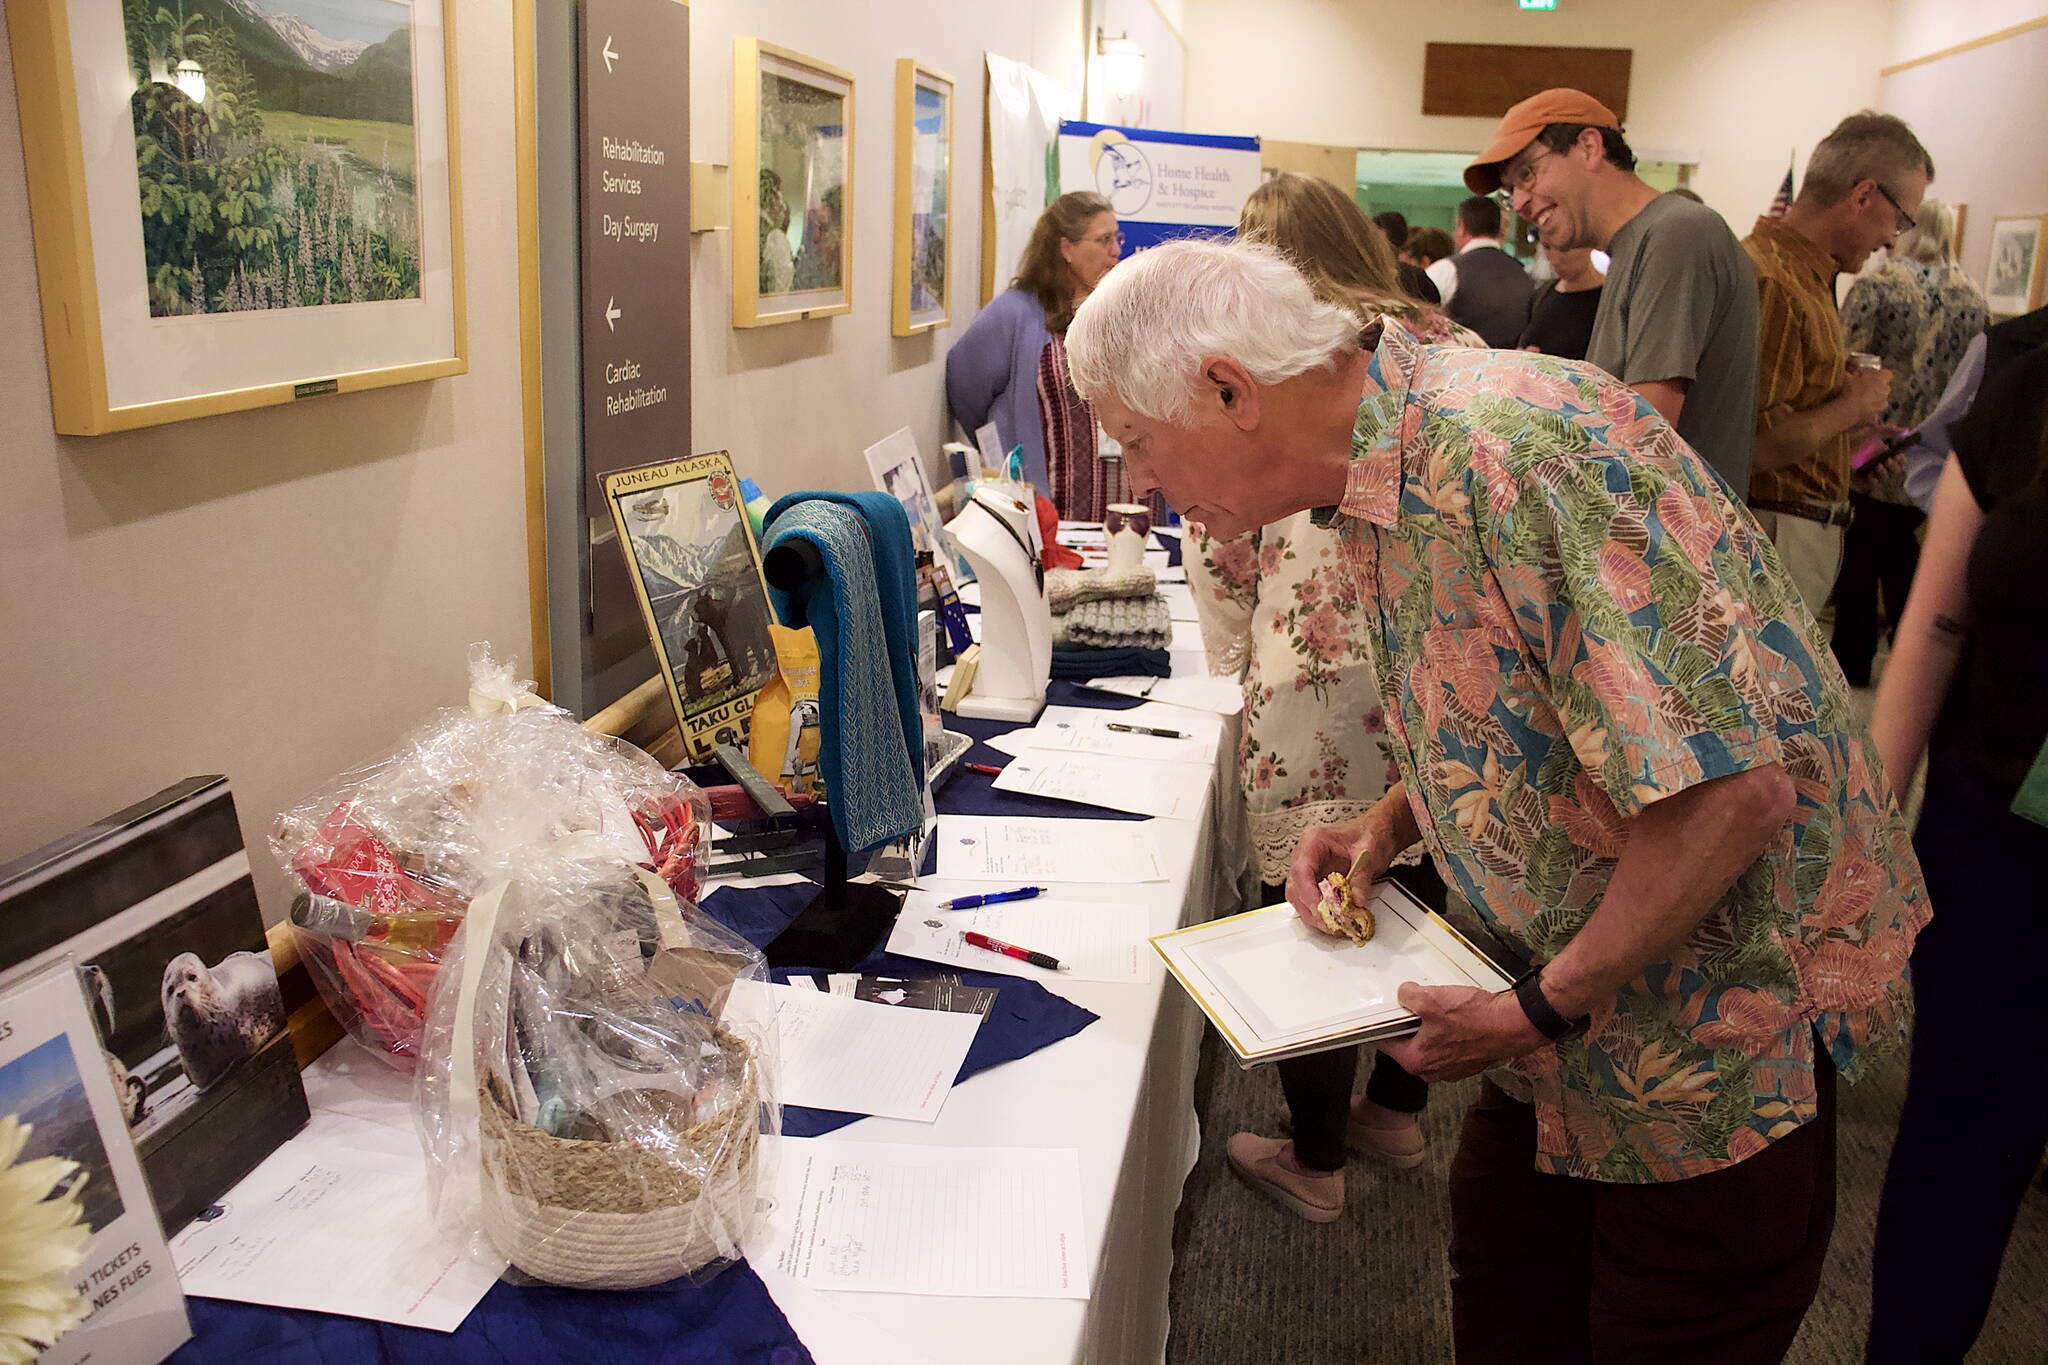 Mark Sabbatini / Juneau Empire
Sam Trivette, a Juneau resident since 1954, examines items at a silent auction during Bartlett Regional Hospital celebratory launch of hospice and home care services Thursday.